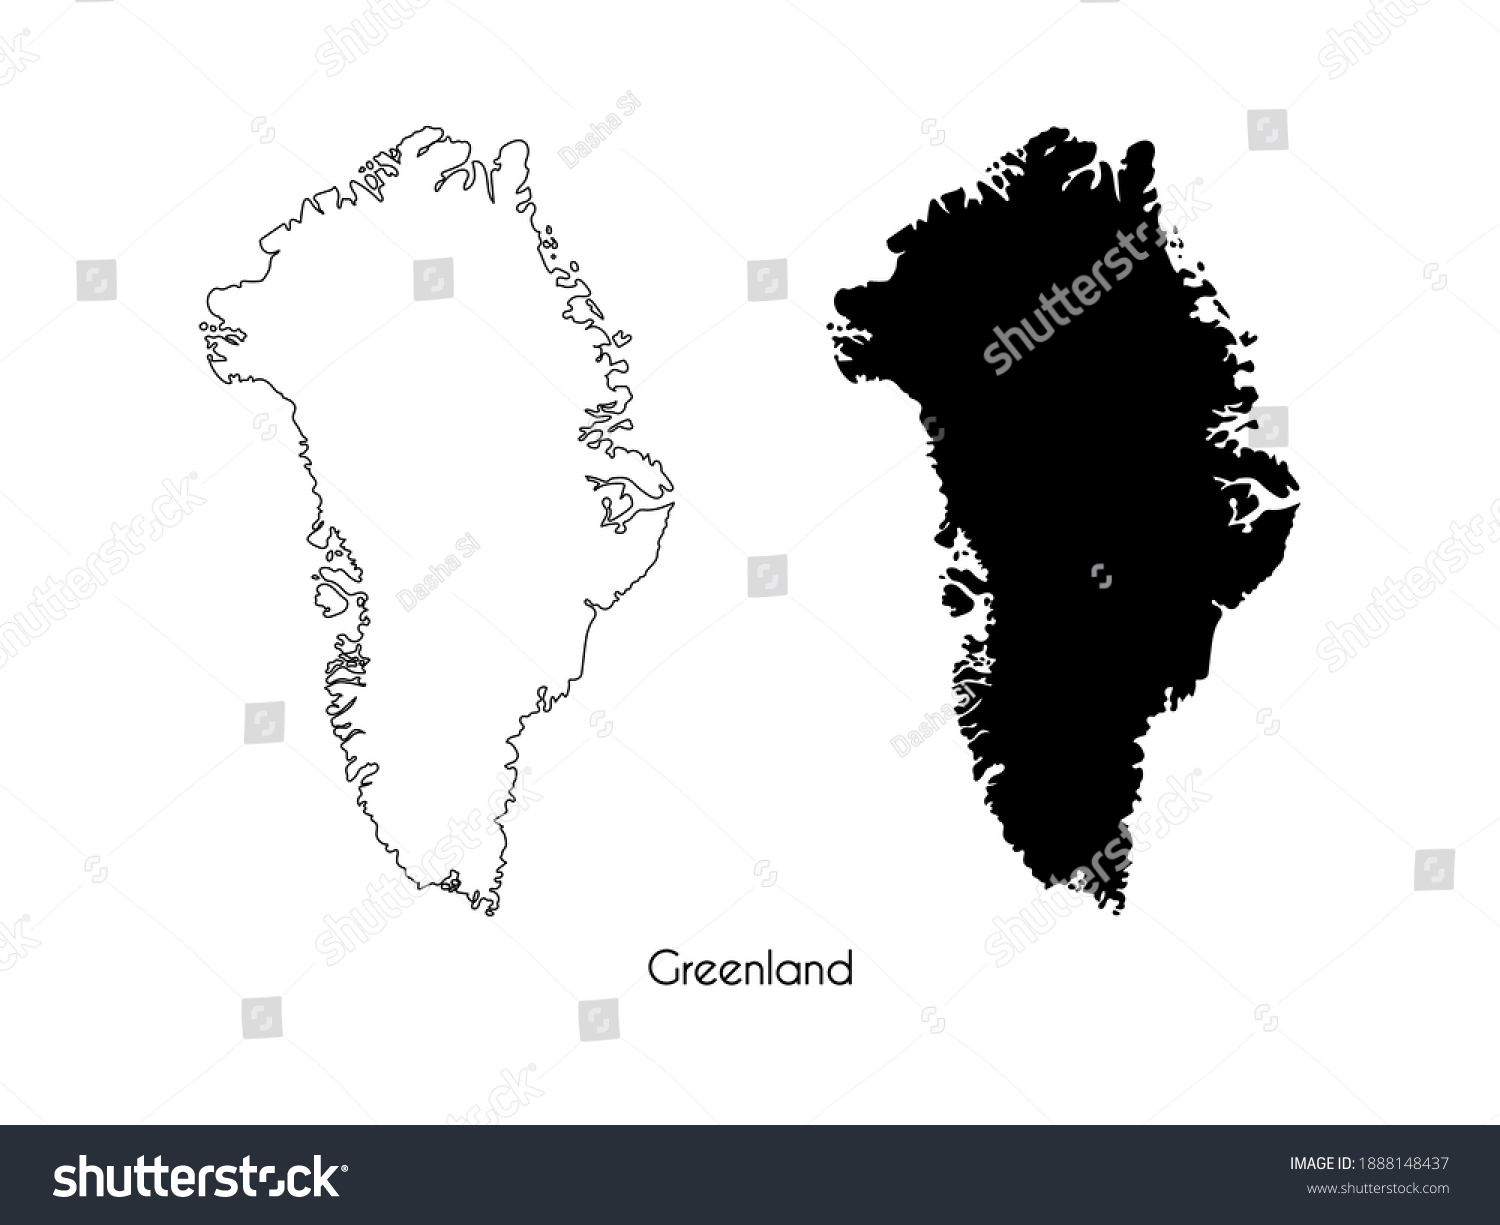 Isolated linear outline and black silhouette map of Greenland on white background. Highly detailed map of Greenland with country name. Vector. #1888148437